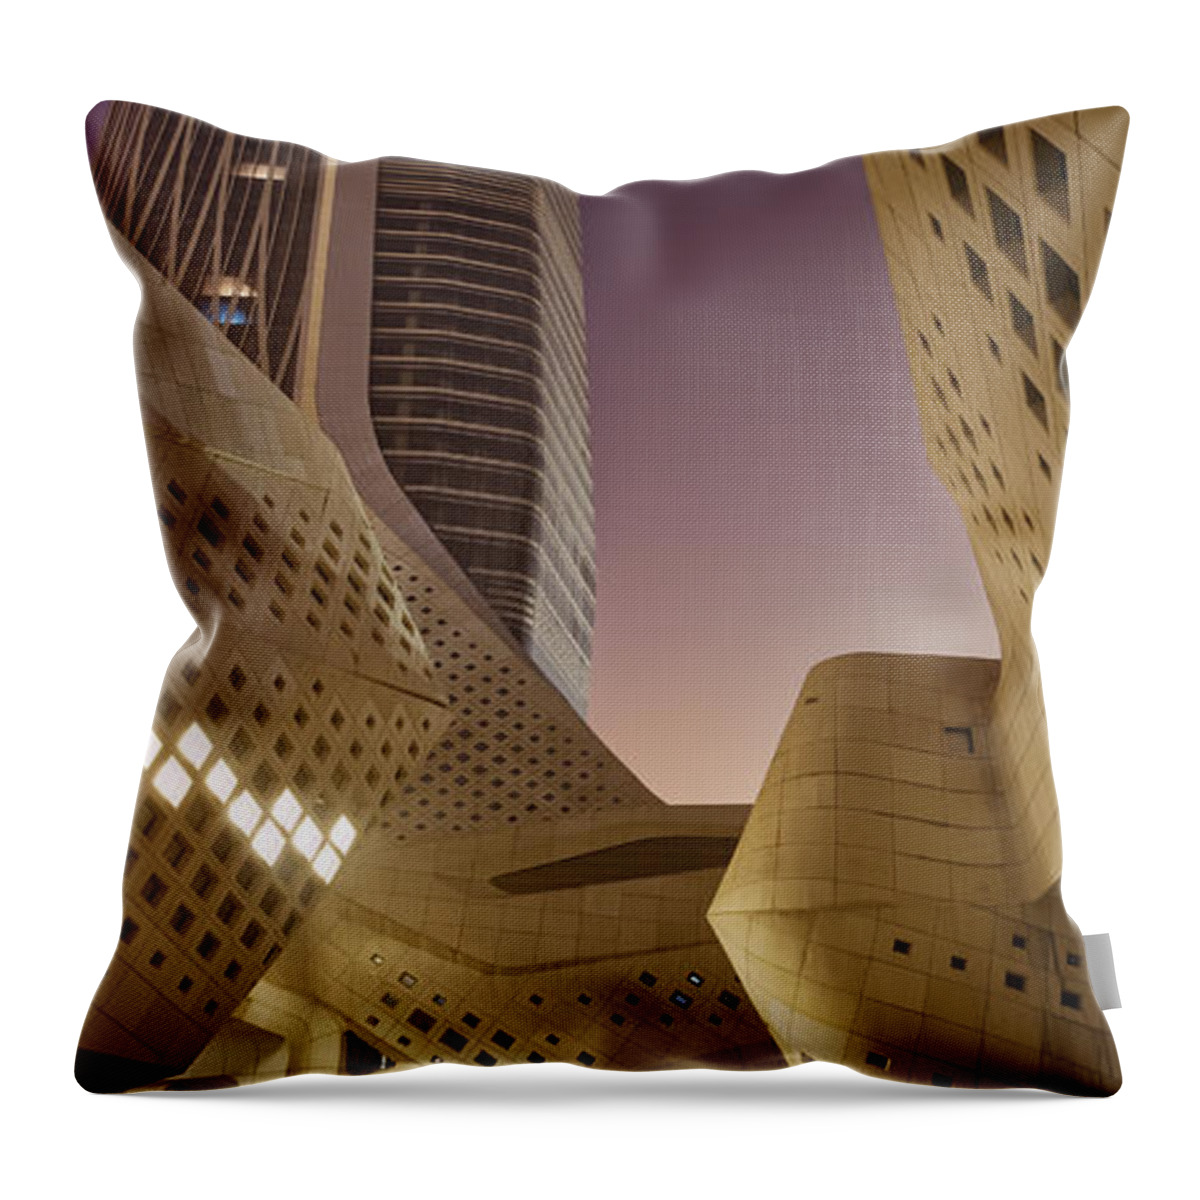 Alien Throw Pillow featuring the photograph New Worlds by James L Davidson